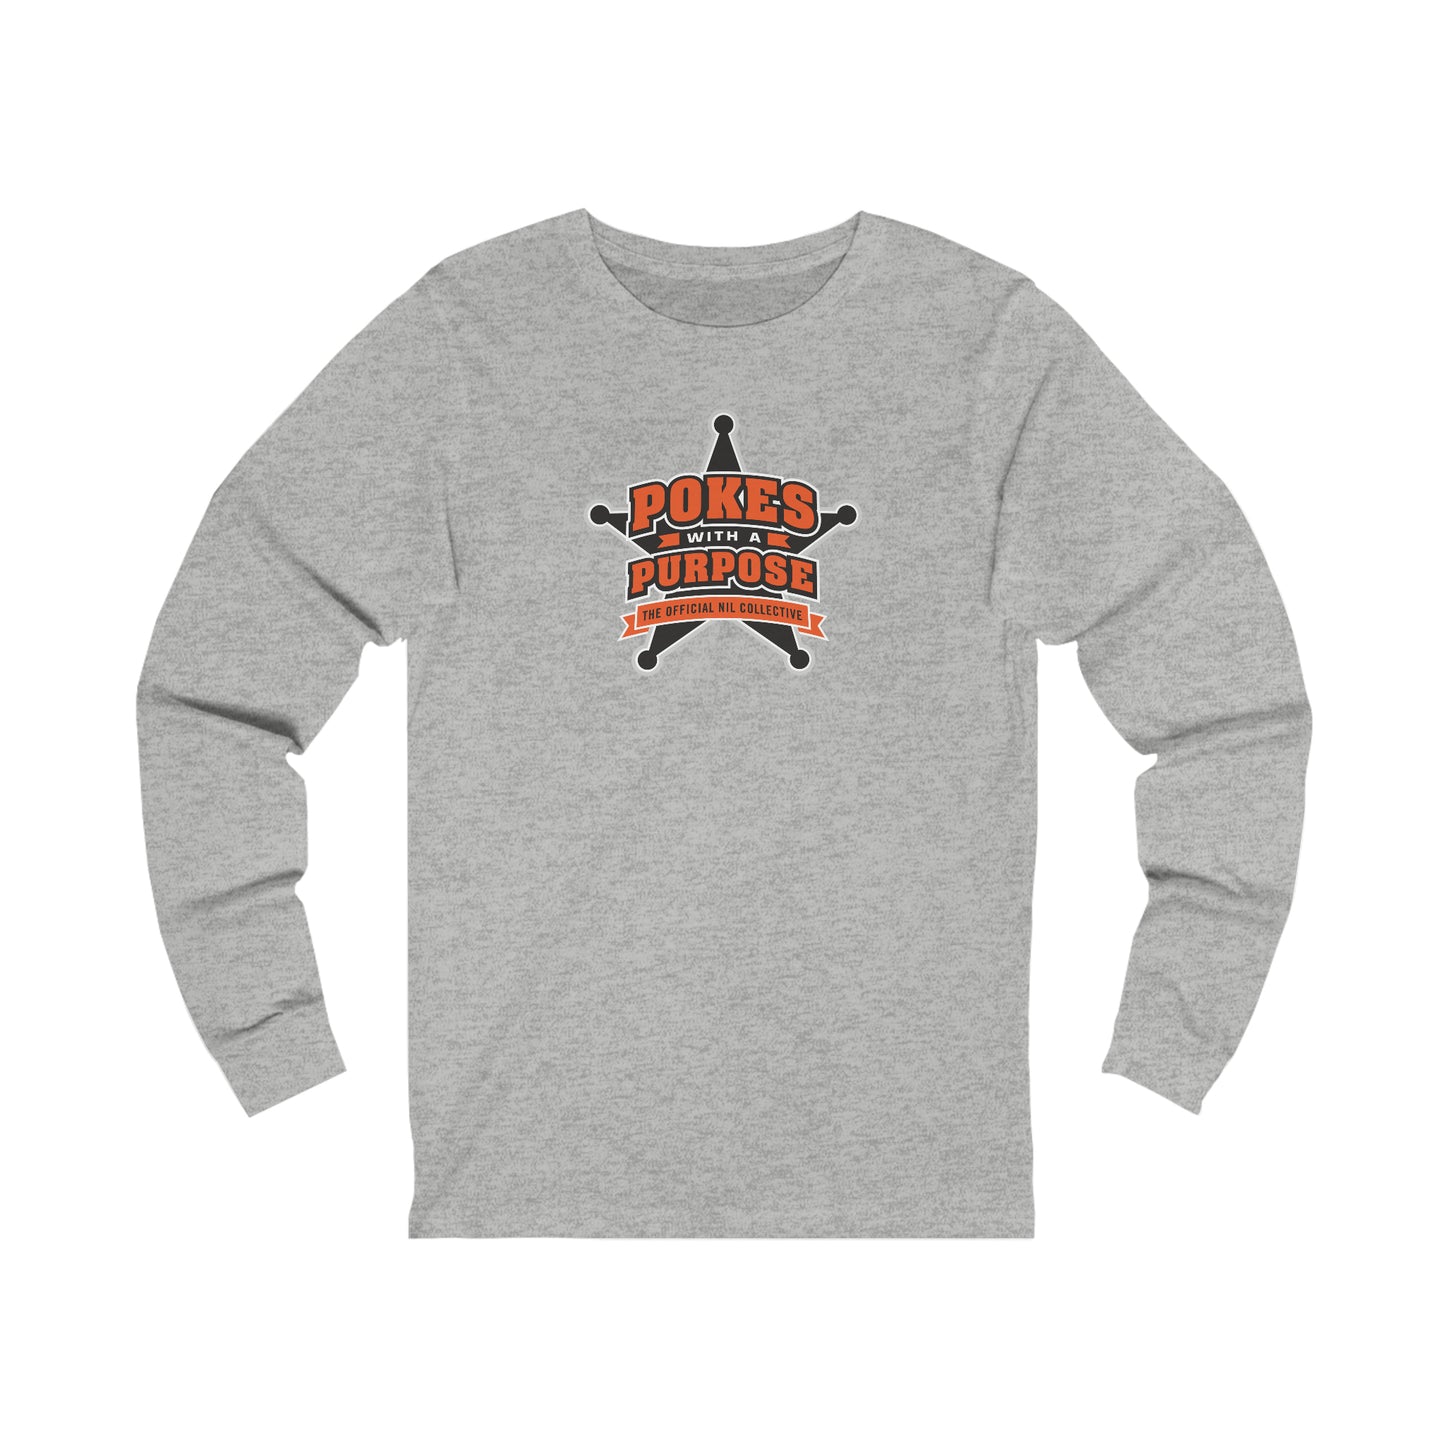 Pokes With A Purpose Long Sleeve